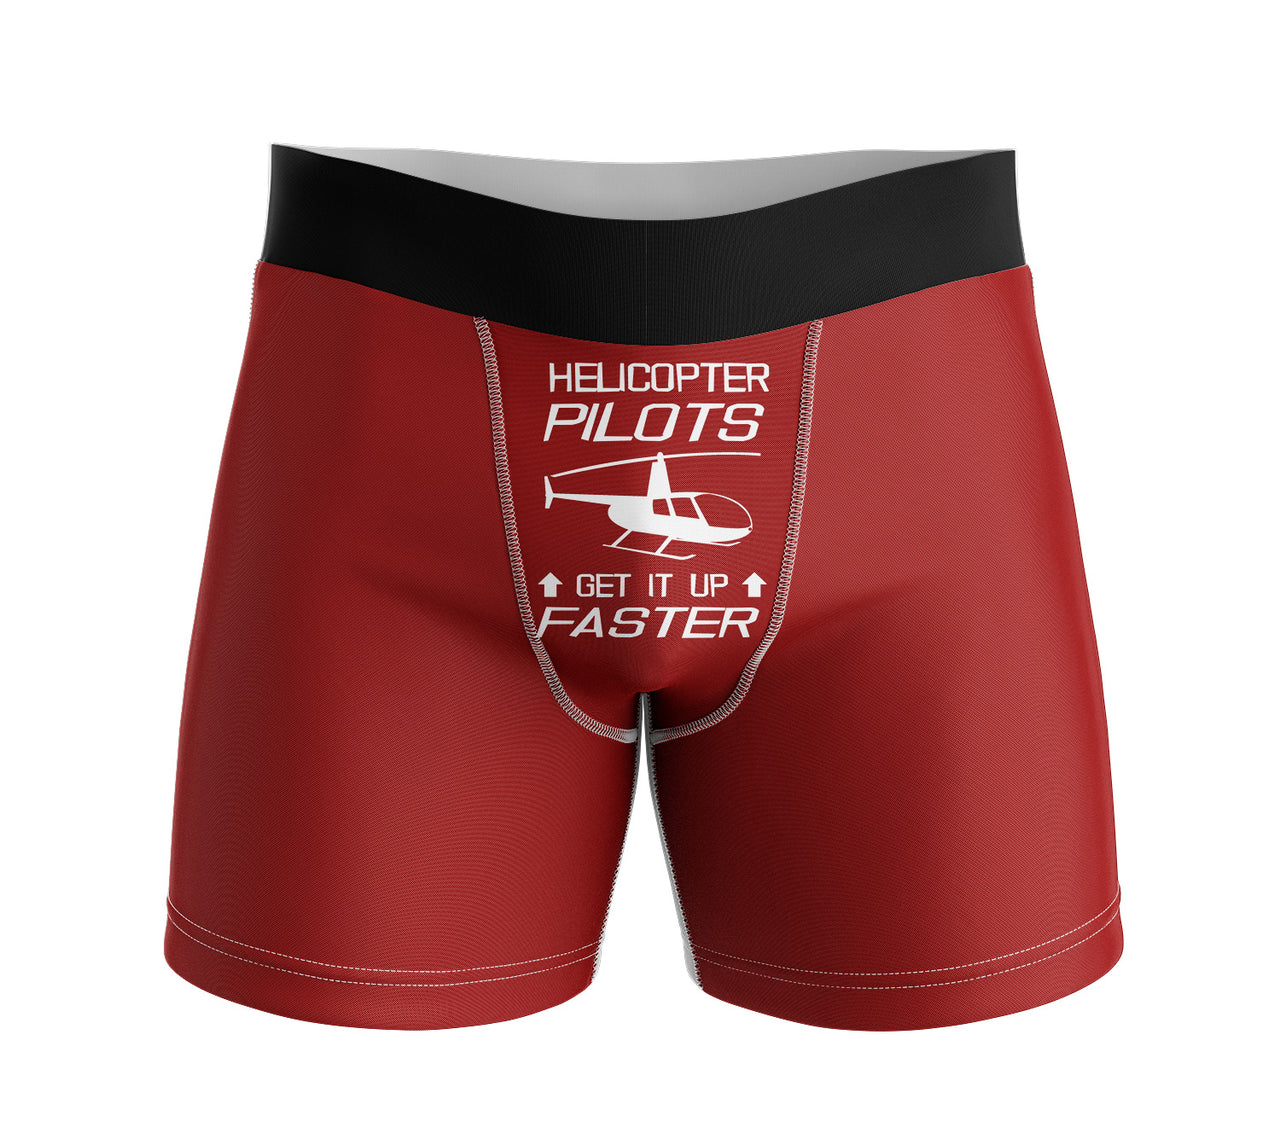 Helicopter Pilots Get It Up Faster Designed Men Boxers